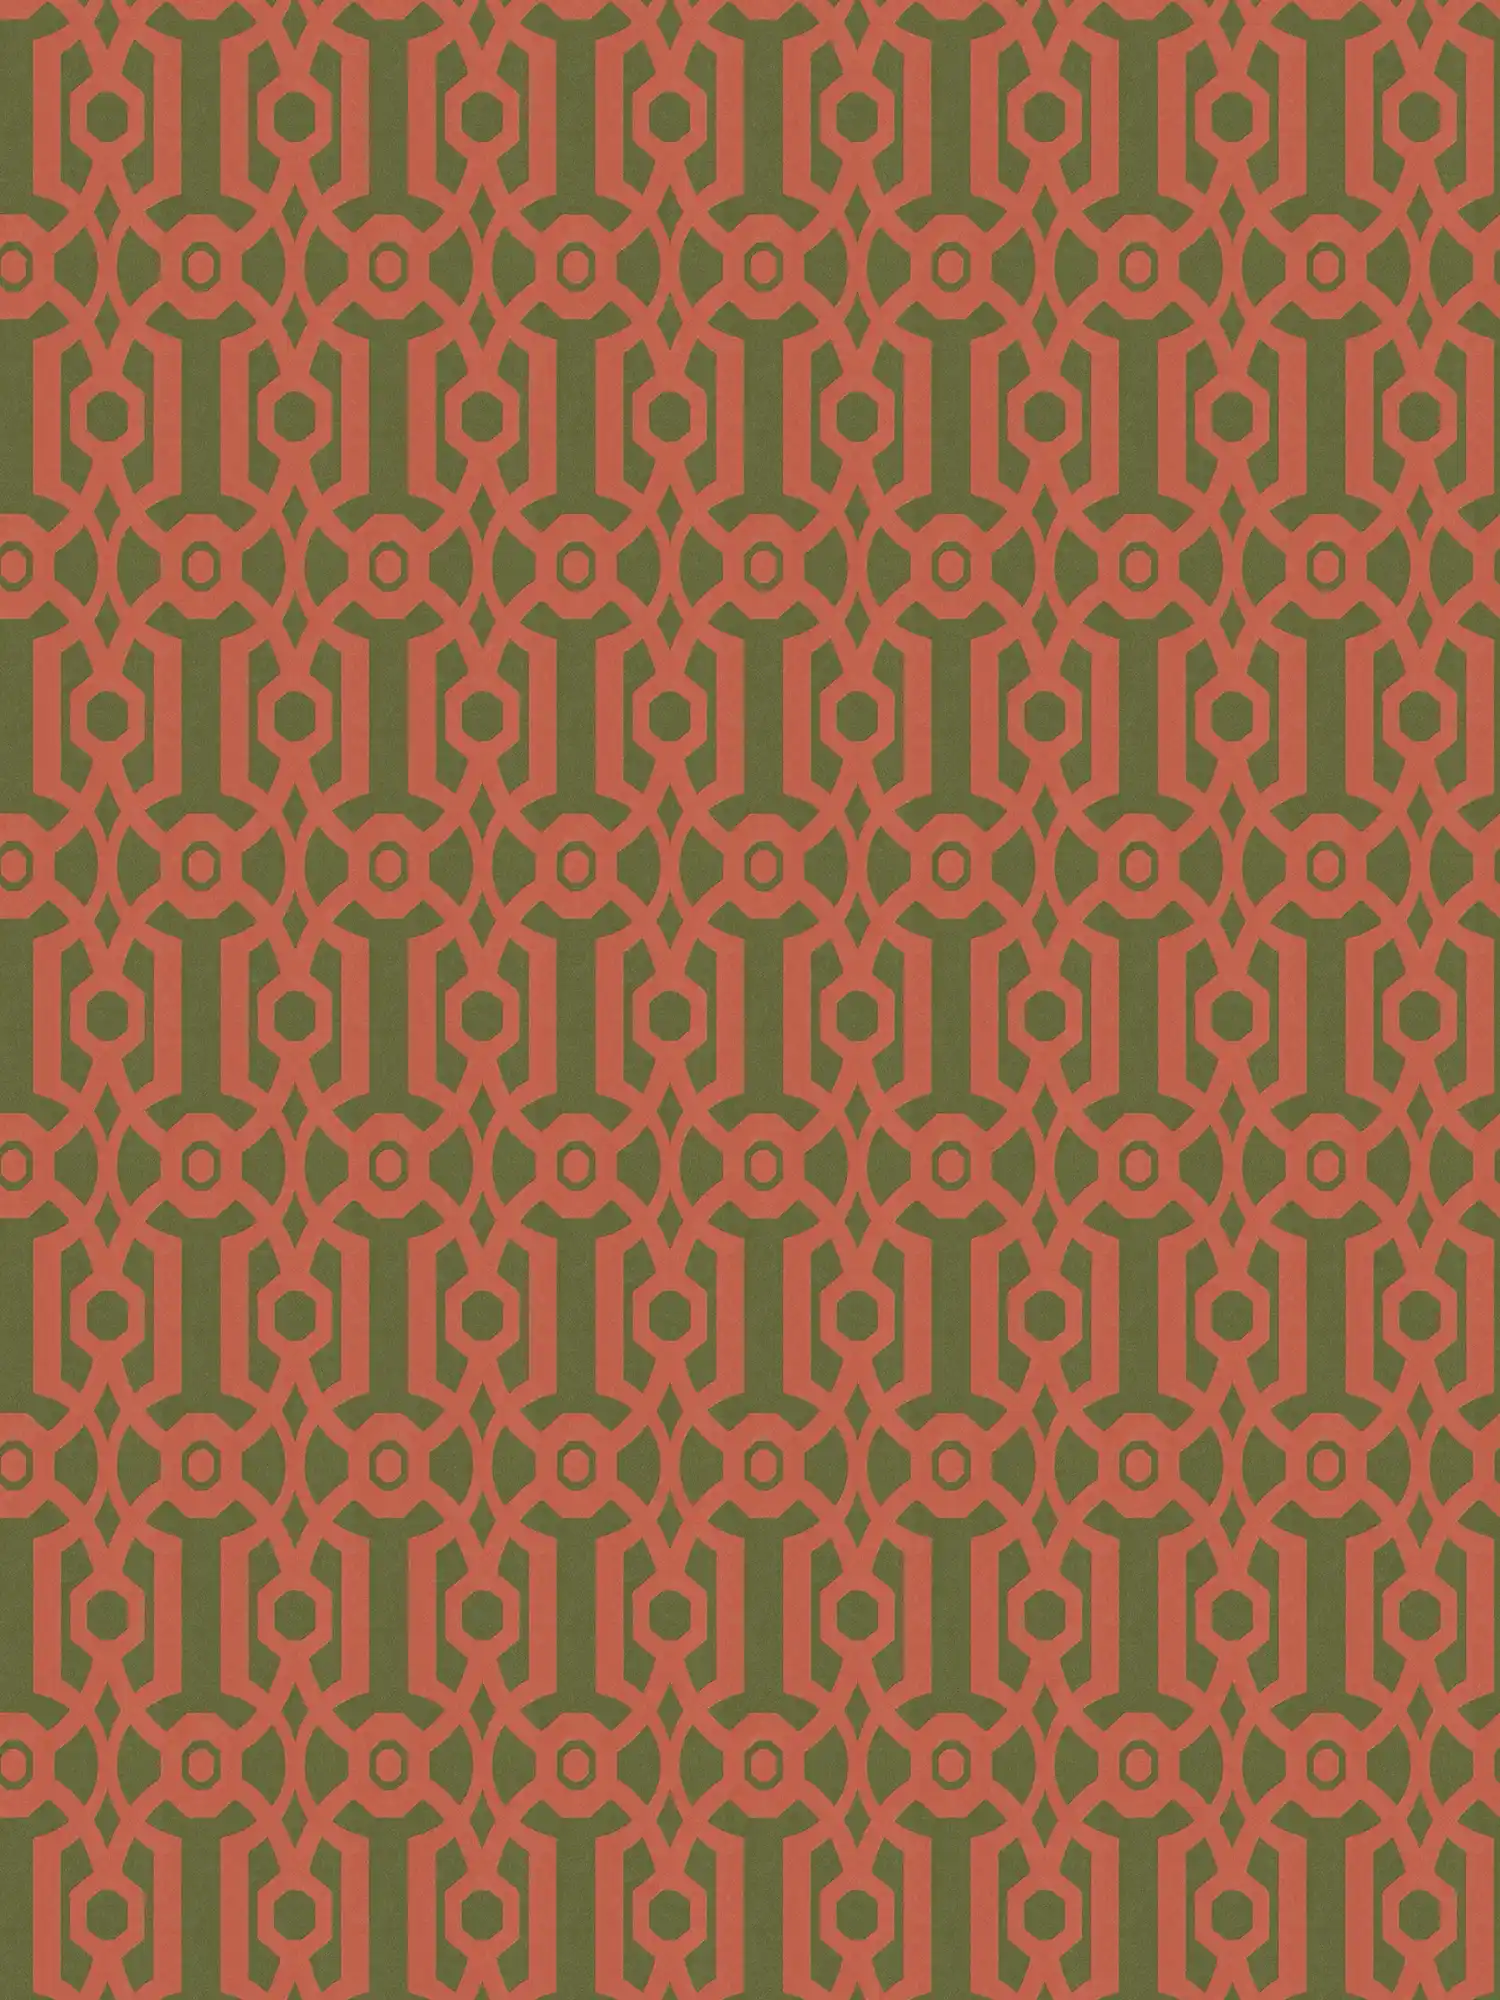 Non-woven wallpaper with graphic pattern in English style - orange, green
